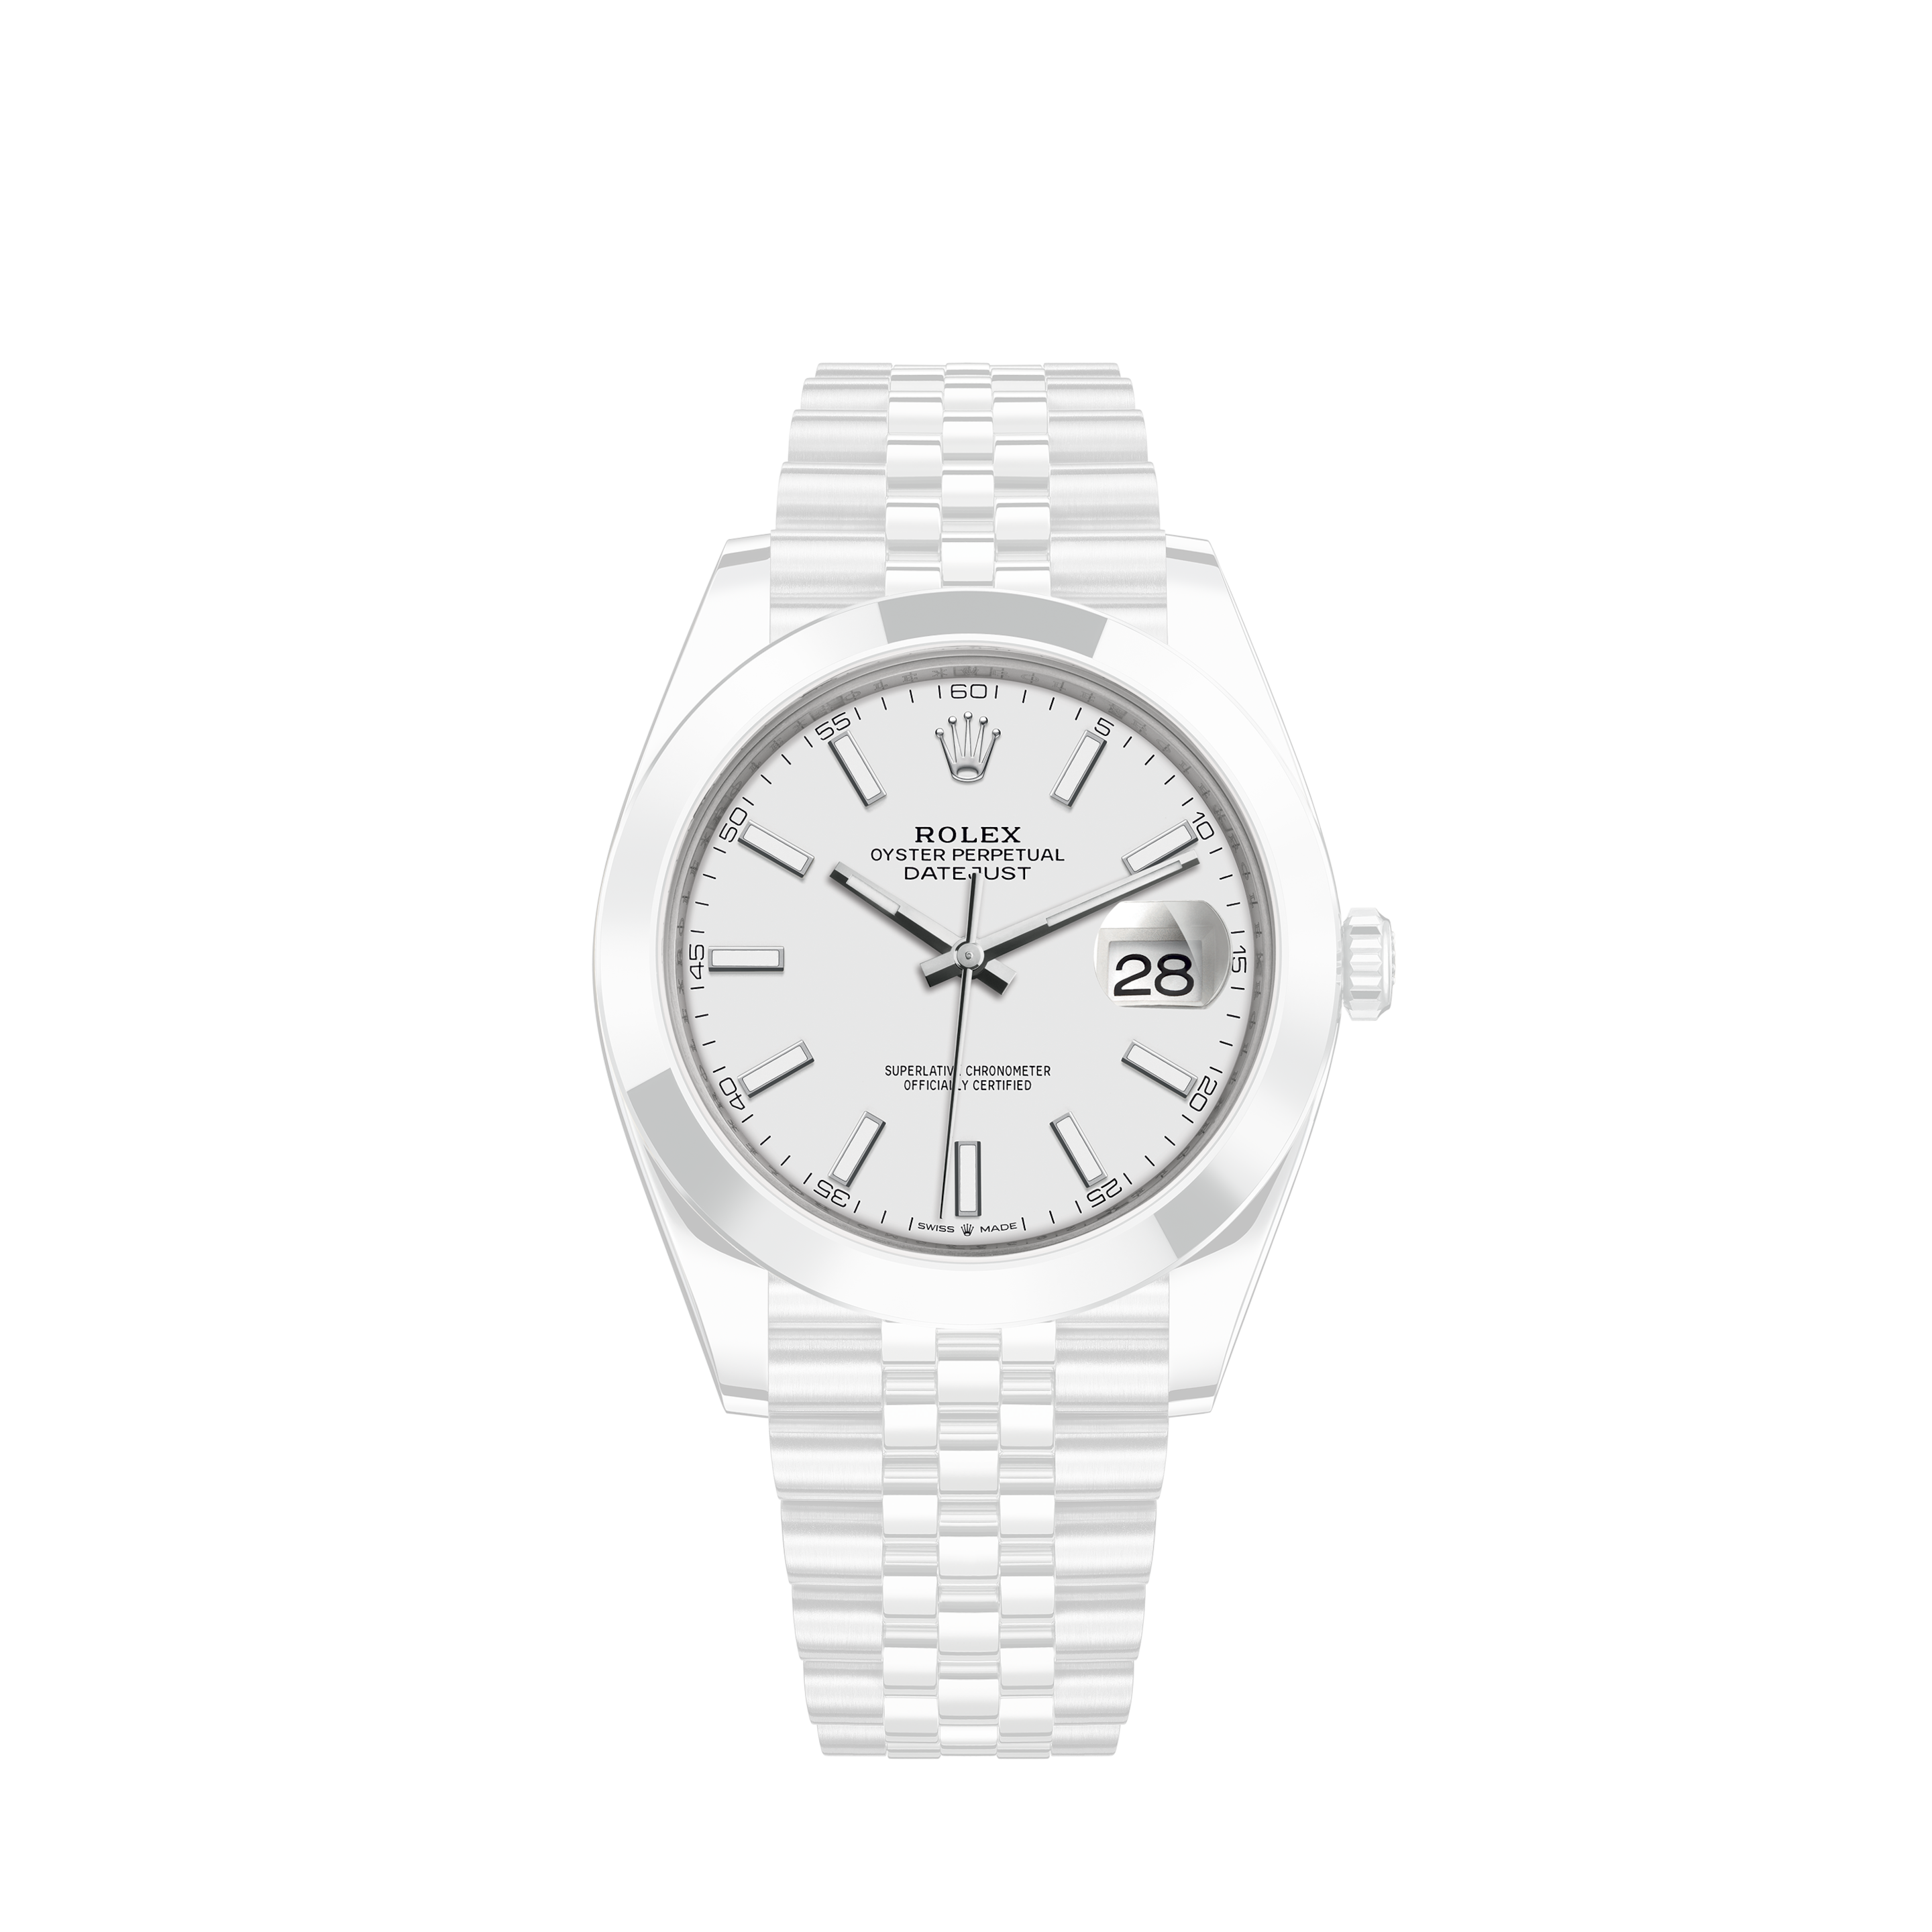 Rolex 36mm Datejust Classic White Mother of Pearl Diamond Dial Automatic Oyster Perpetual Watch